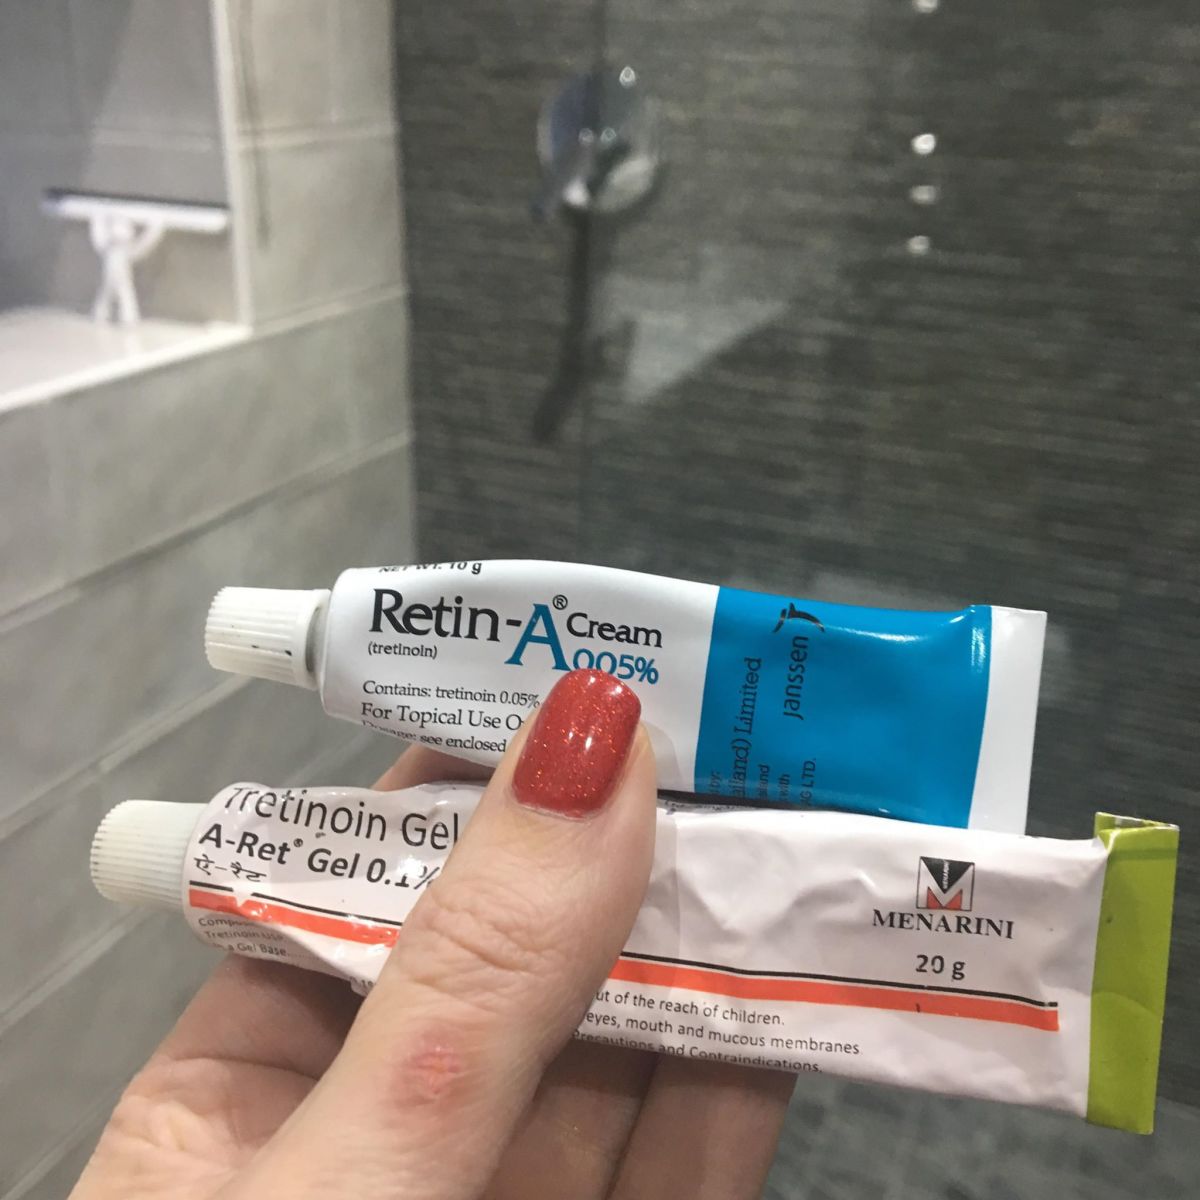 Where Can I Buy Tretinoin in the UK?